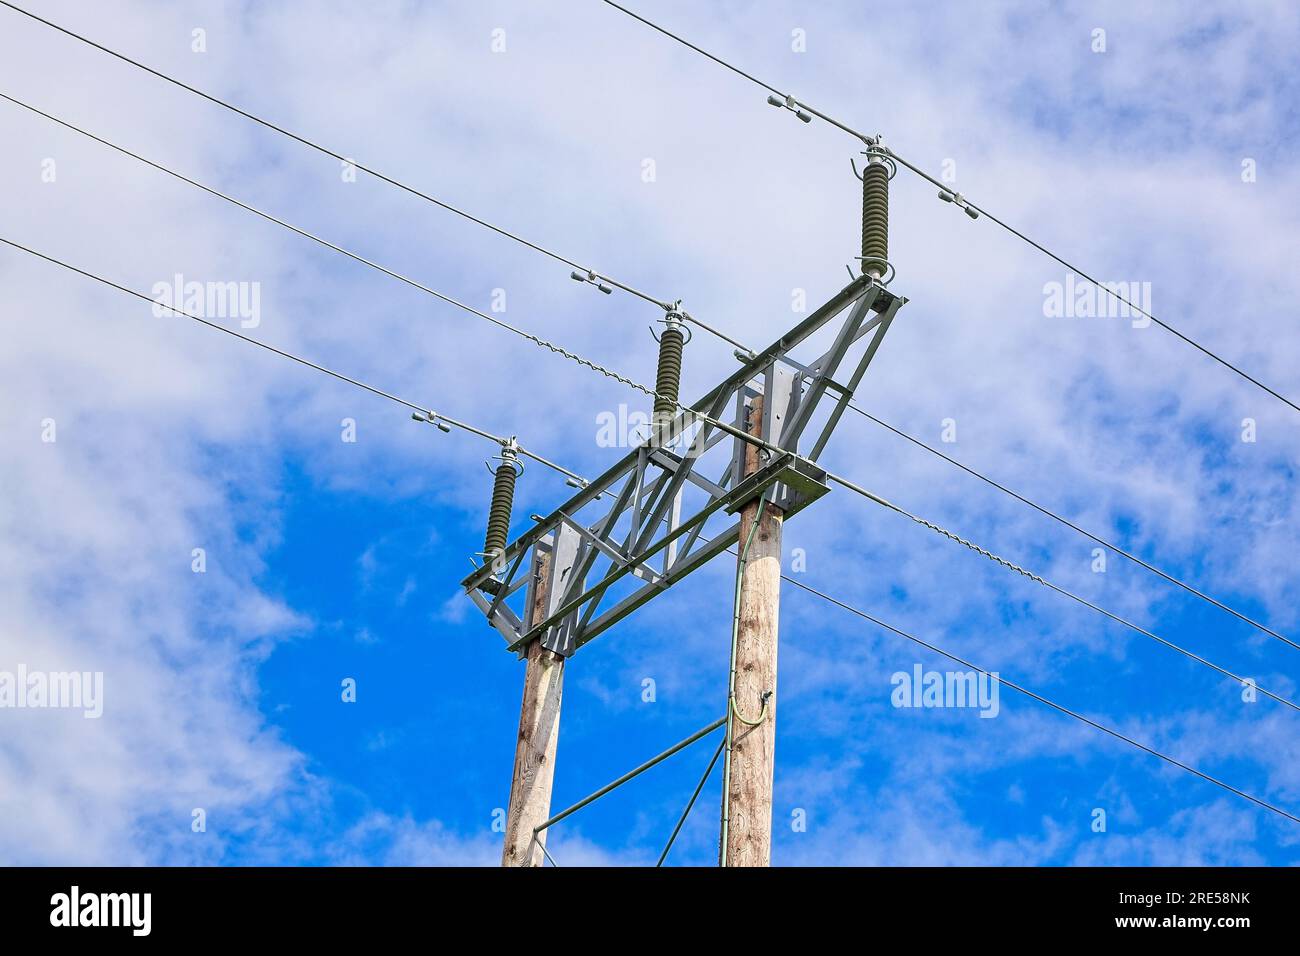 View looking up at power line cables on a metal frame and wooden polls Stock Photo